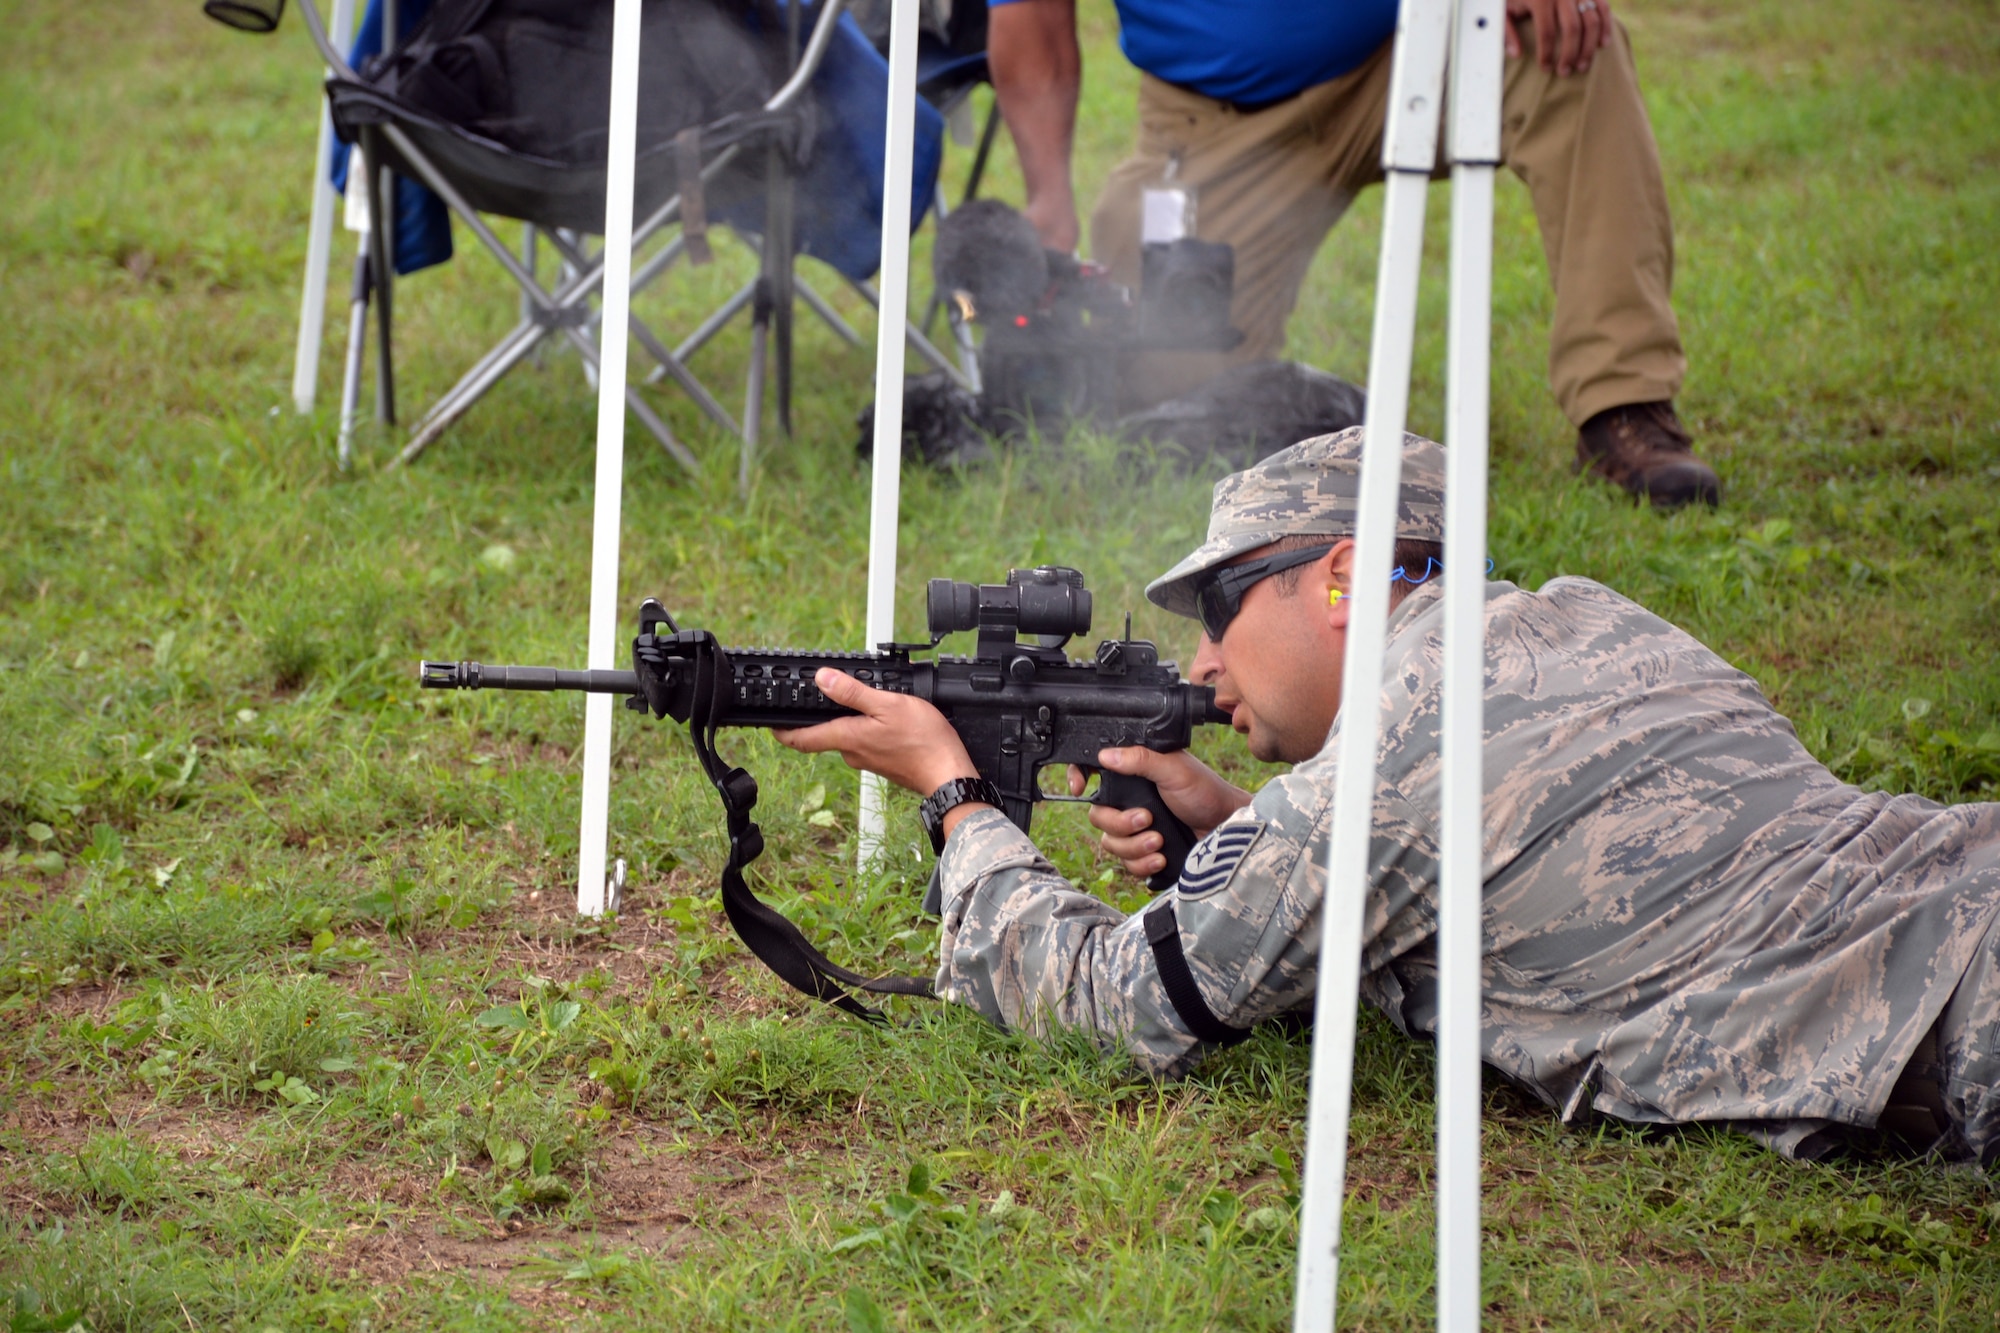 Tech Sgt. Francisco Gonzalez, Air Force Reserve Command Defender Challenge team member, fires an M4 carbine rifle at the Brain in a Box during the combat endurance relay Sept. 13, 2018 at Camp Bullis Military Training Reservation, Texas.